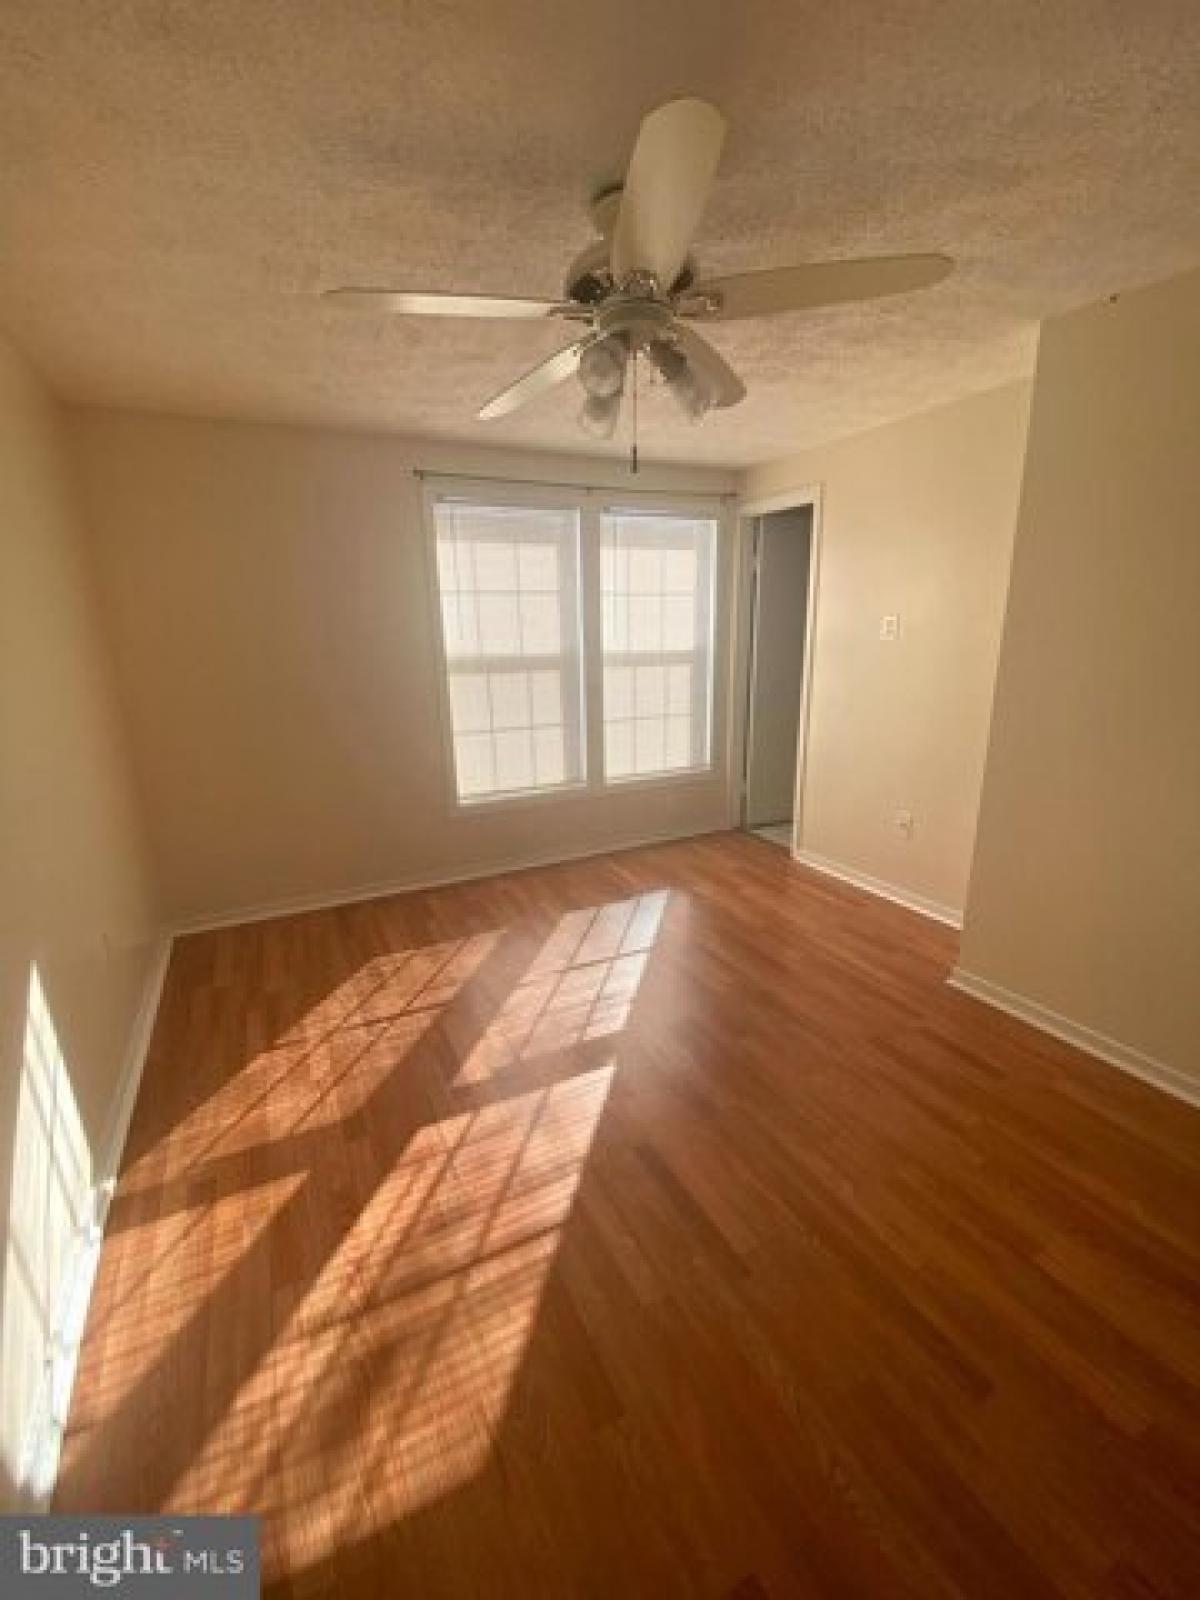 Picture of Home For Rent in Gaithersburg, Maryland, United States